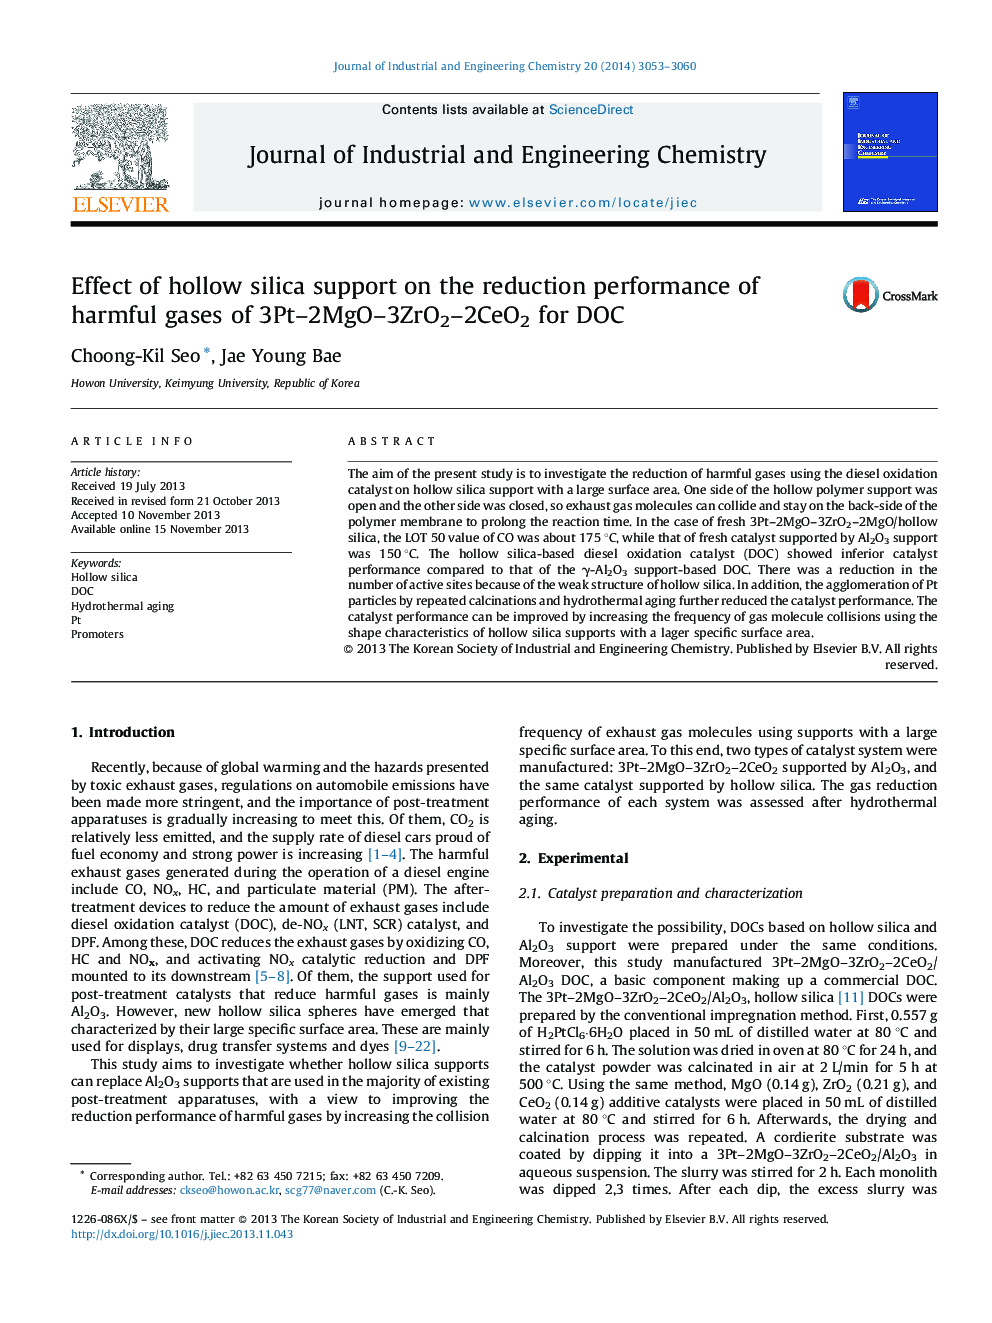 Effect of hollow silica support on the reduction performance of harmful gases of 3Pt–2MgO–3ZrO2–2CeO2 for DOC